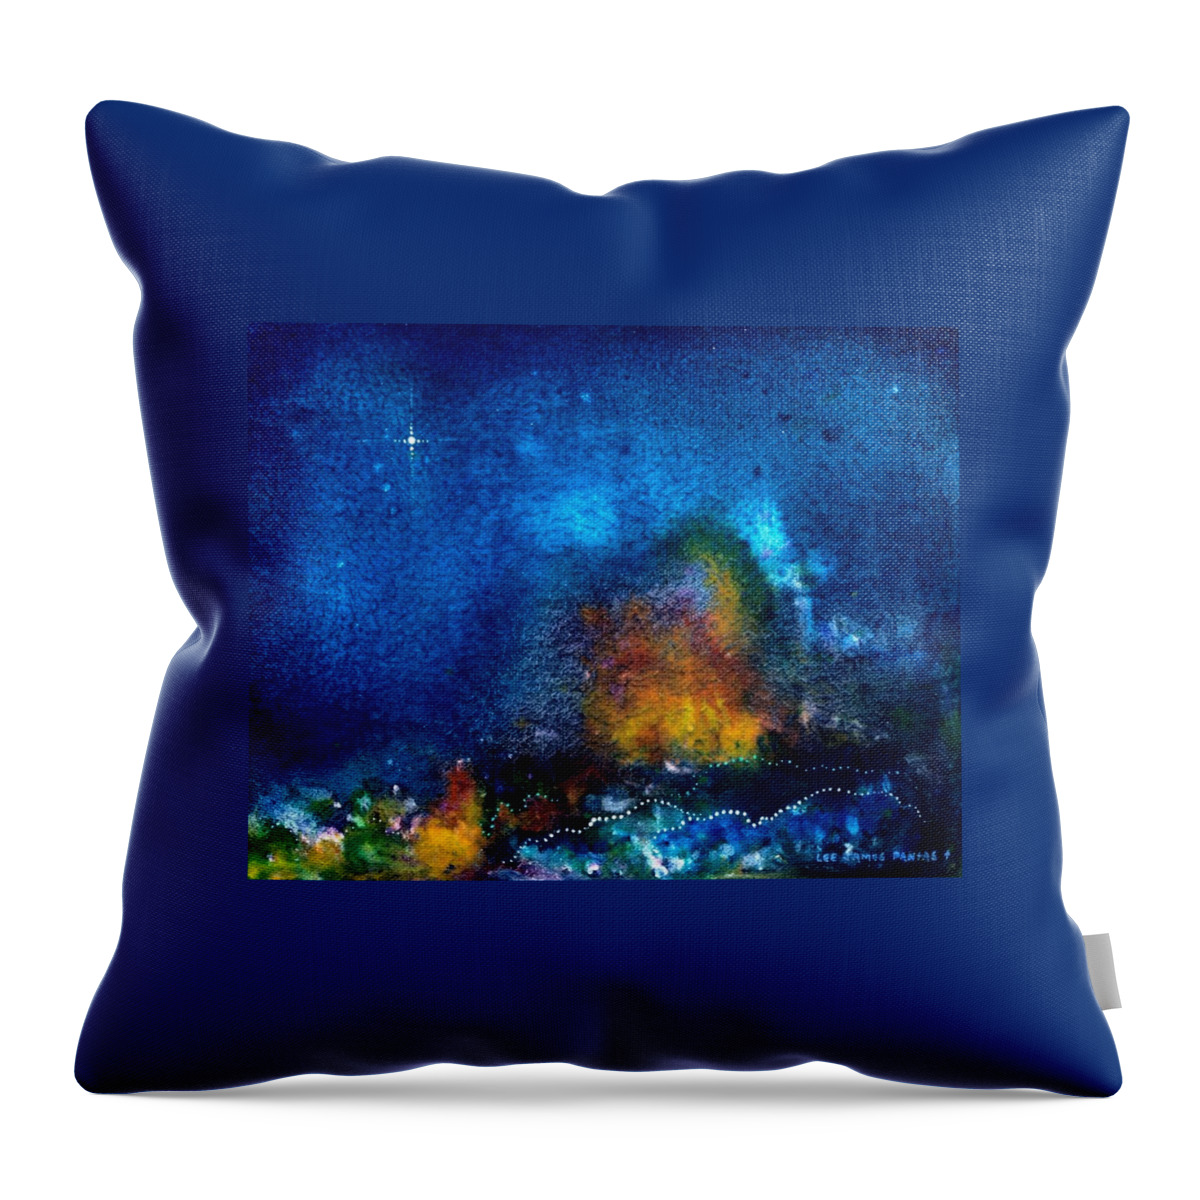 Spiritual Throw Pillow featuring the painting The Morning Star by Lee Pantas